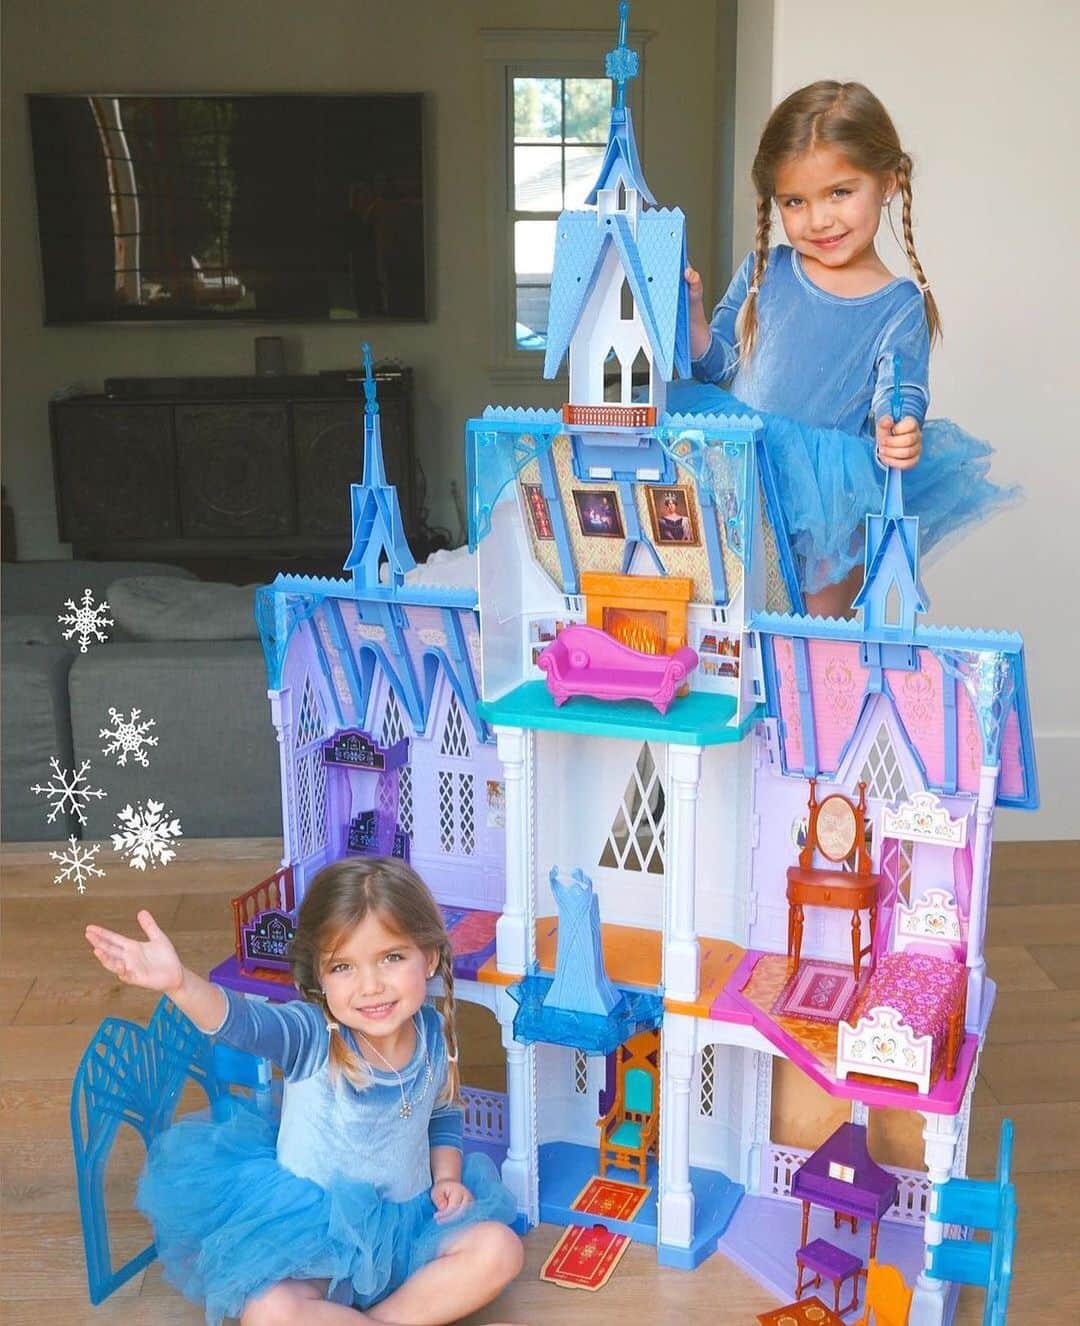 Hasbroのインスタグラム：「#repost @taytumandoakley: Look what we got for Christmas #ad - the Ultimate Arendelle Castle Playset, inspired by Disney’s Frozen 2! The castle has four floors consisting of 7 different rooms, with cool features like a moving balcony and colorful light show inspired by the Northern Lights And the castle is even bigger than we are! We’re having so much fun playing Frozen ️ @Hasbro, #Disney, #frozen2」